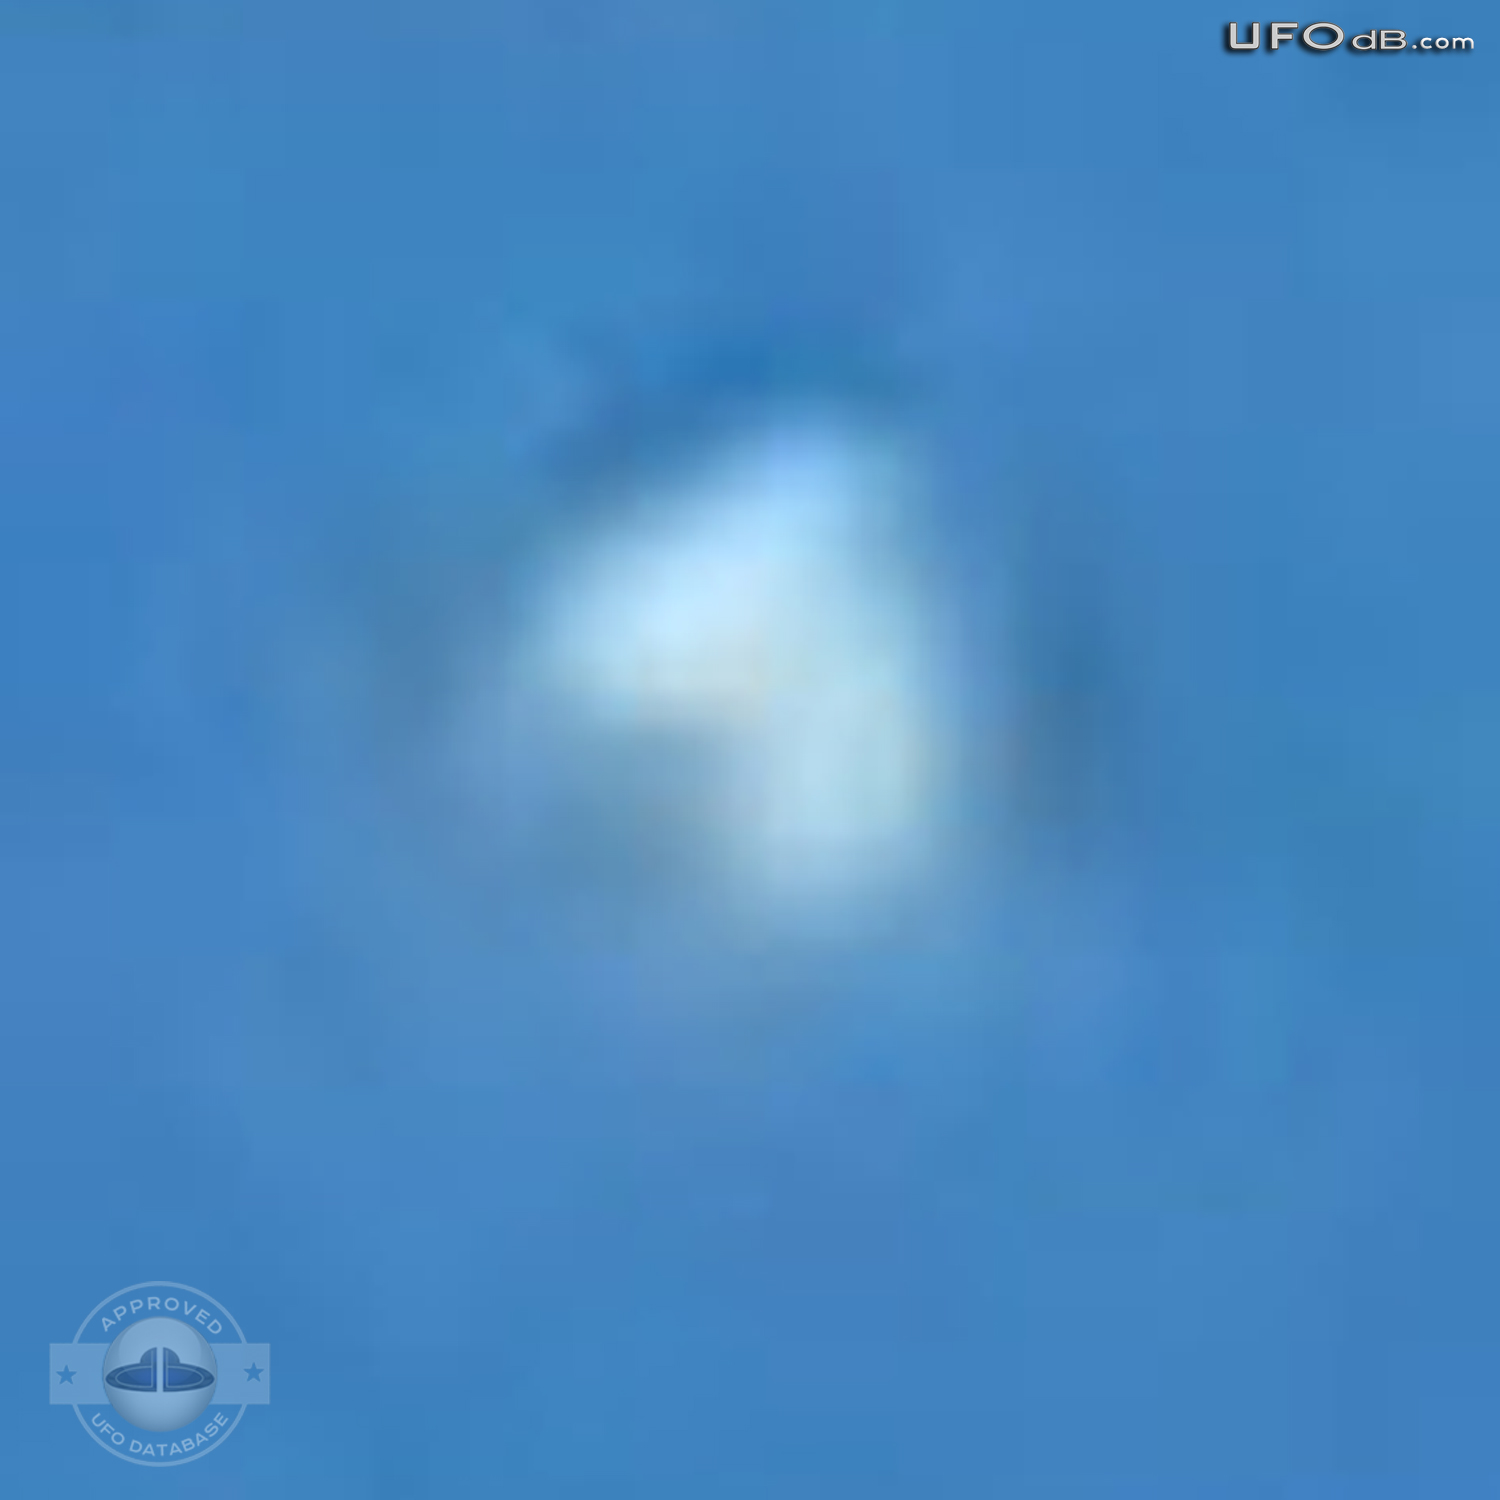 Five Apparent UFOs in the sky of Portland | Oregon, USA | May 1 2011 UFO Picture #314-5